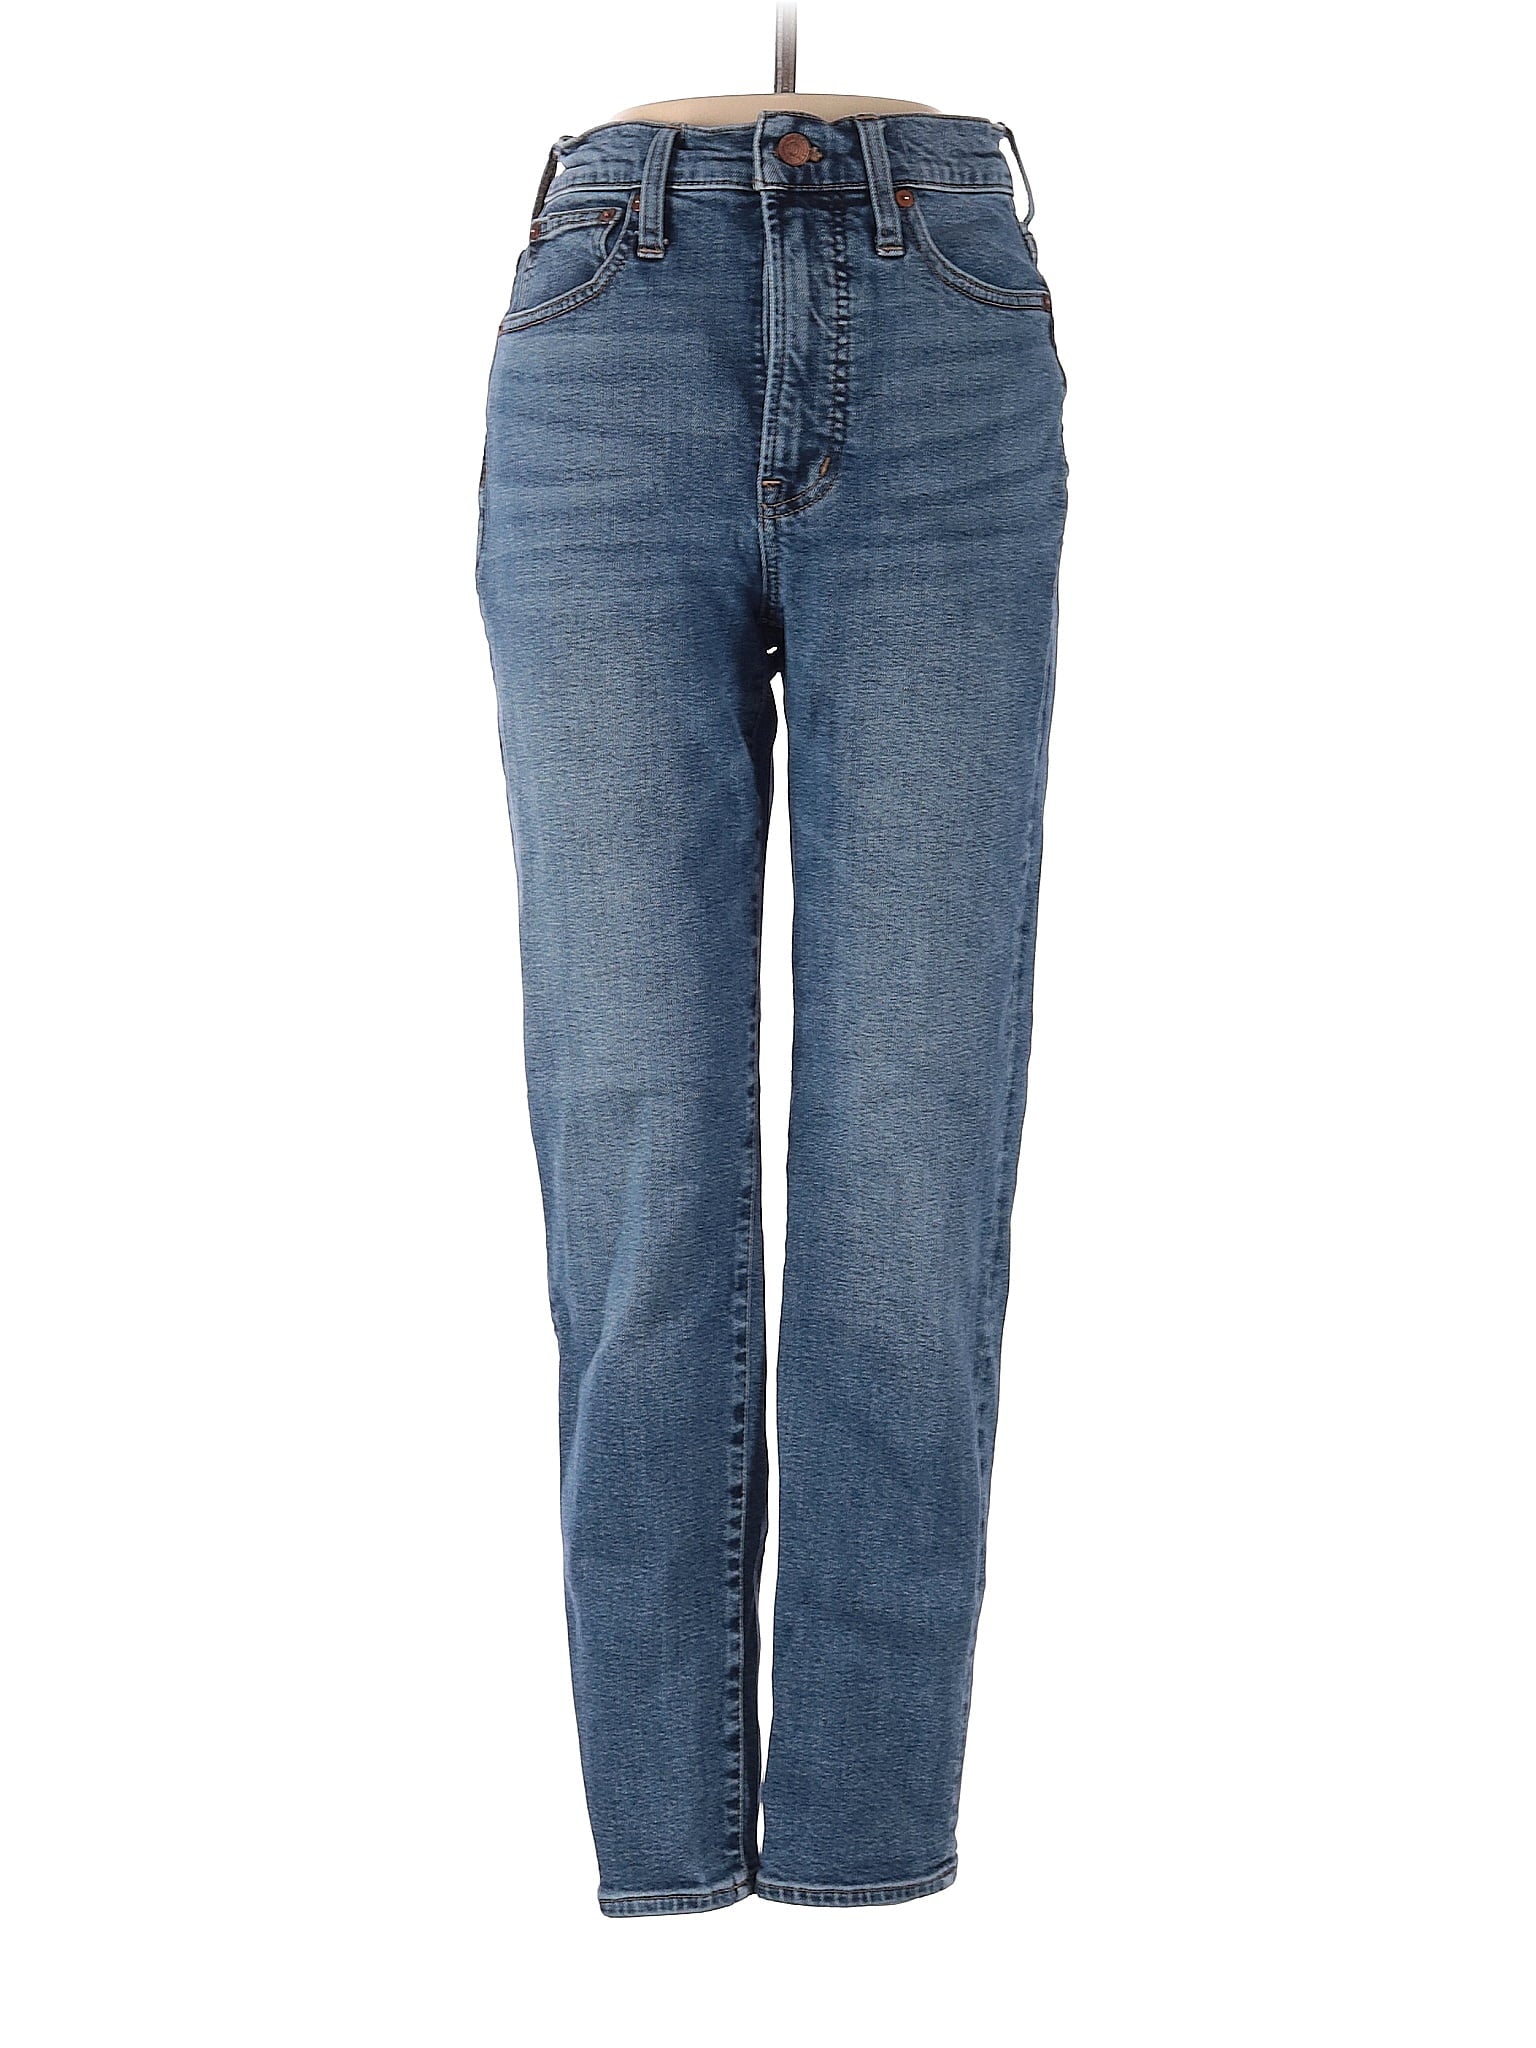 High-Rise Boyjeans The Perfect Vintage Jean In Arland Wash: Instacozy Edition in Medium Wash waist size - 24